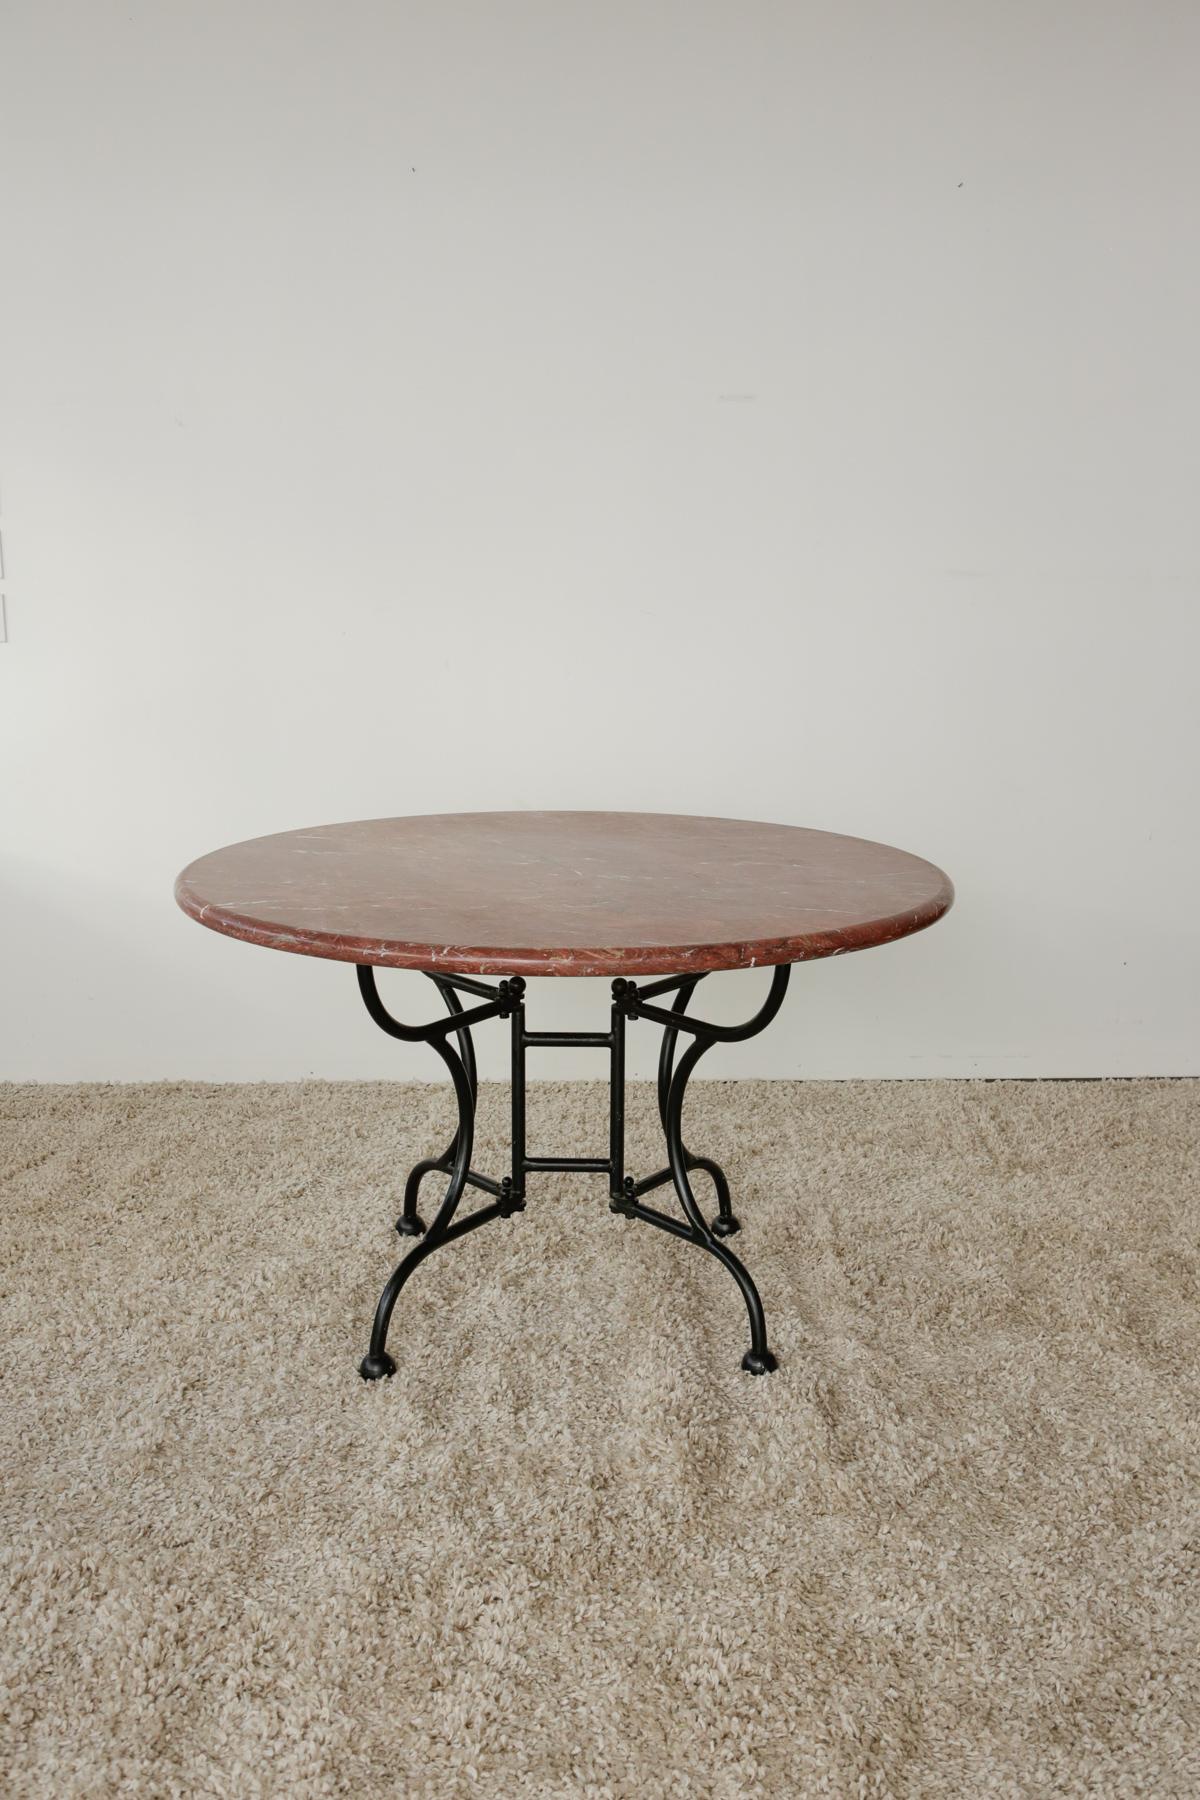 Round Burgundy Marble Table with Cast Iron Legs 5